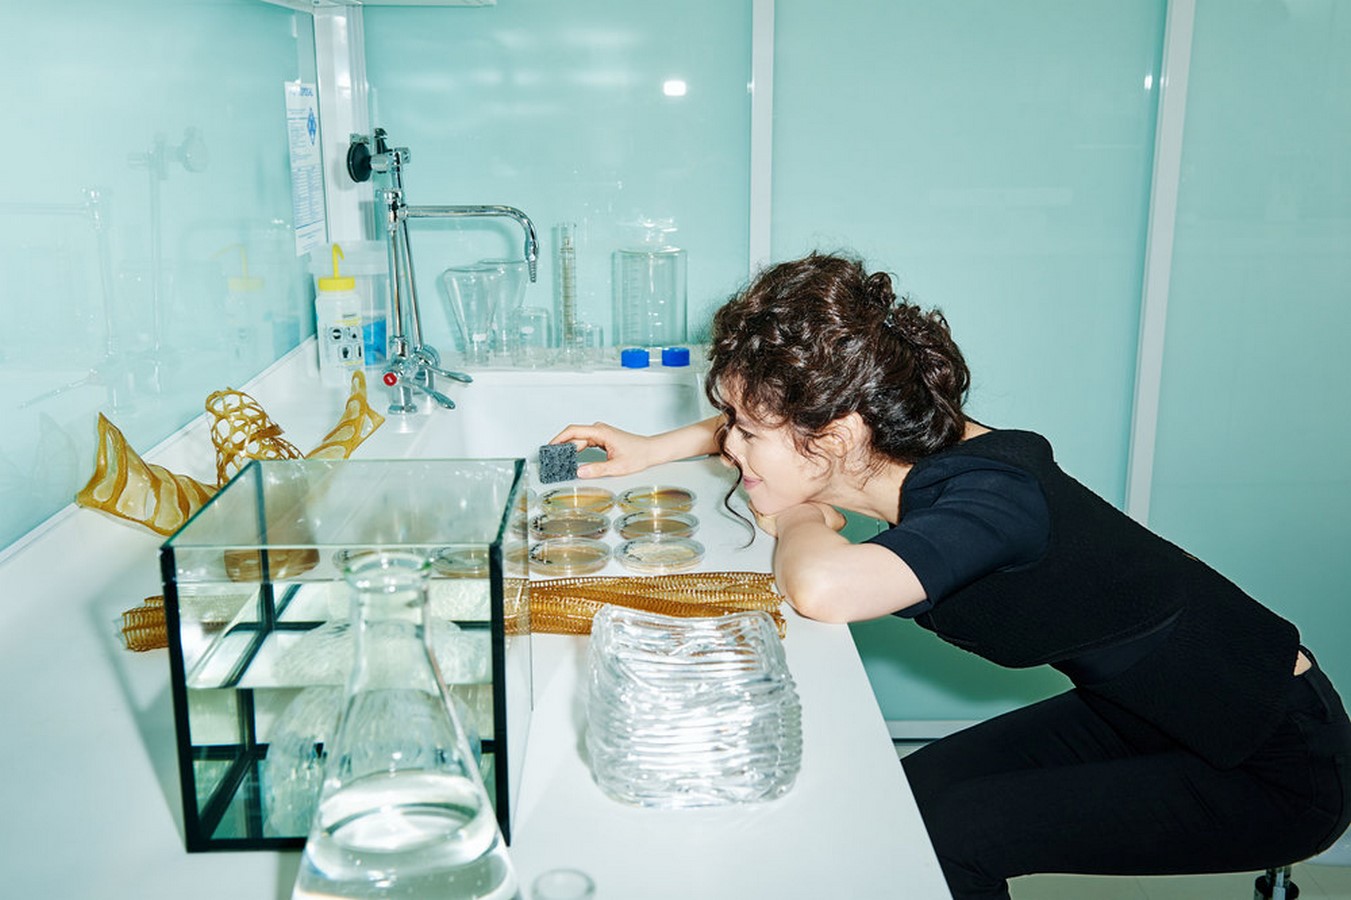 Neri Oxman and the Silkworms: Collaboration with Nature - Sheet1